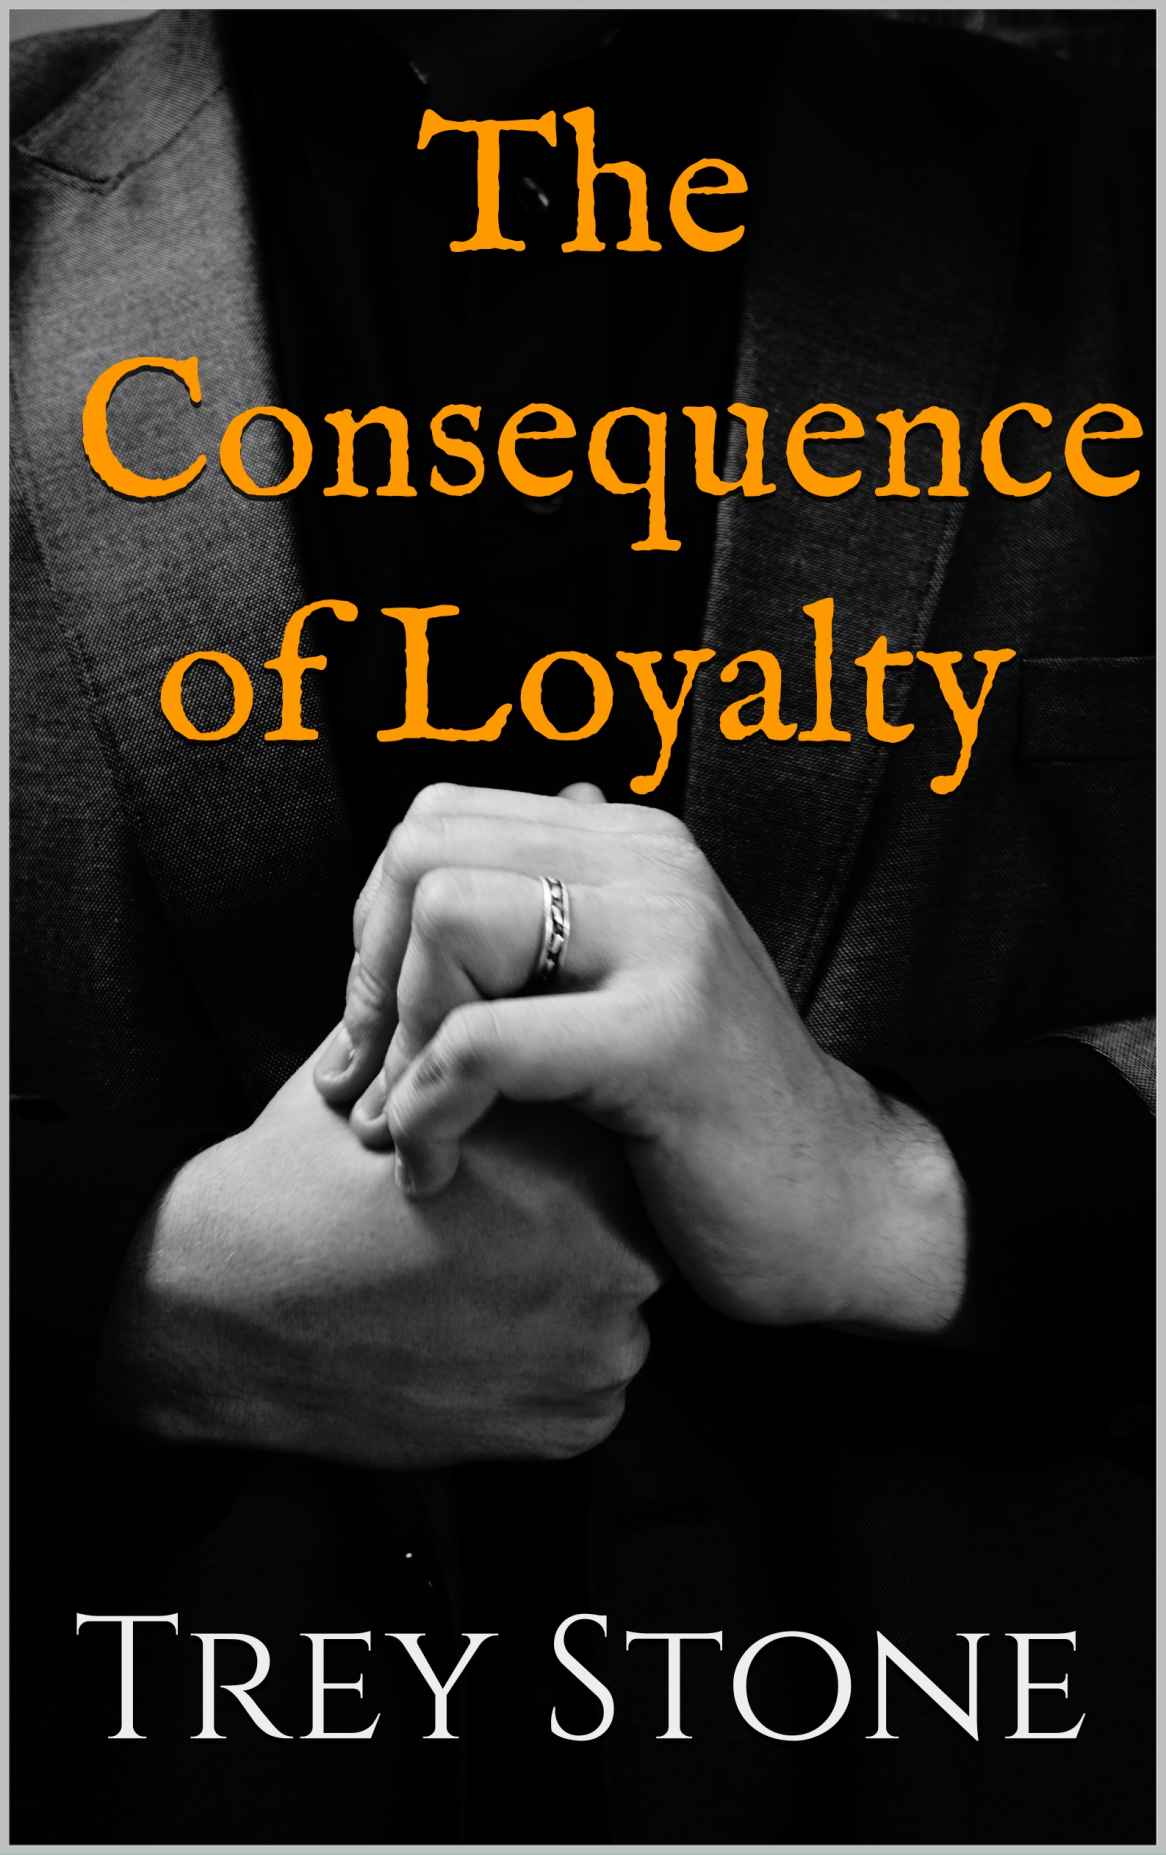 FREE: The Consequence of Loyalty by Trey Stone